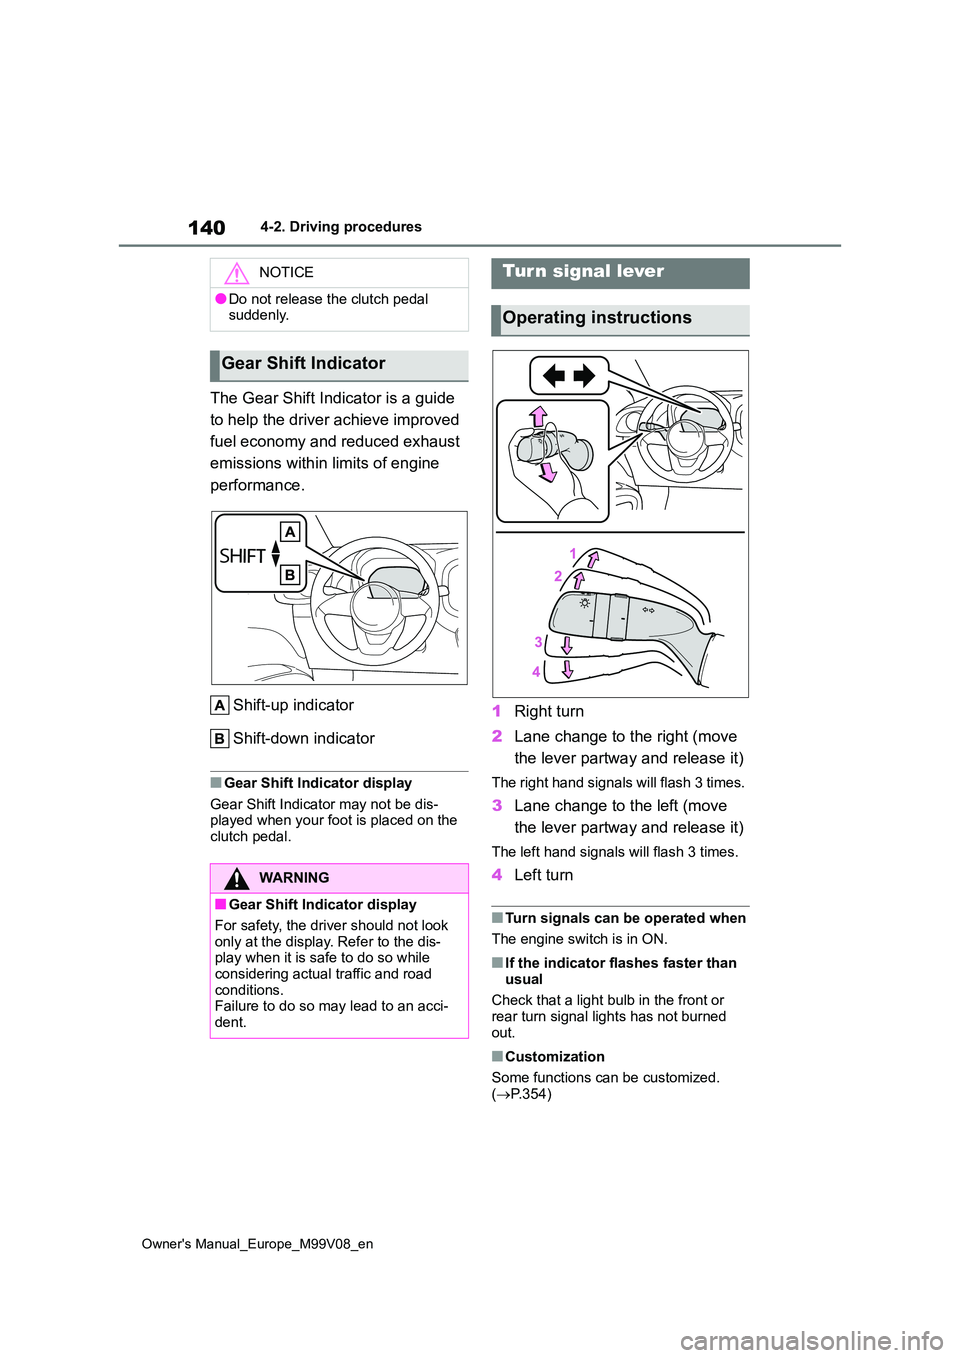 TOYOTA AYGO X 2022   (in English) User Guide 140
Owner's Manual_Europe_M99V08_en
4-2. Driving procedures
The Gear Shift Indicator is a guide  
to help the driver achieve improved  
fuel economy and reduced exhaust  
emissions within limits o